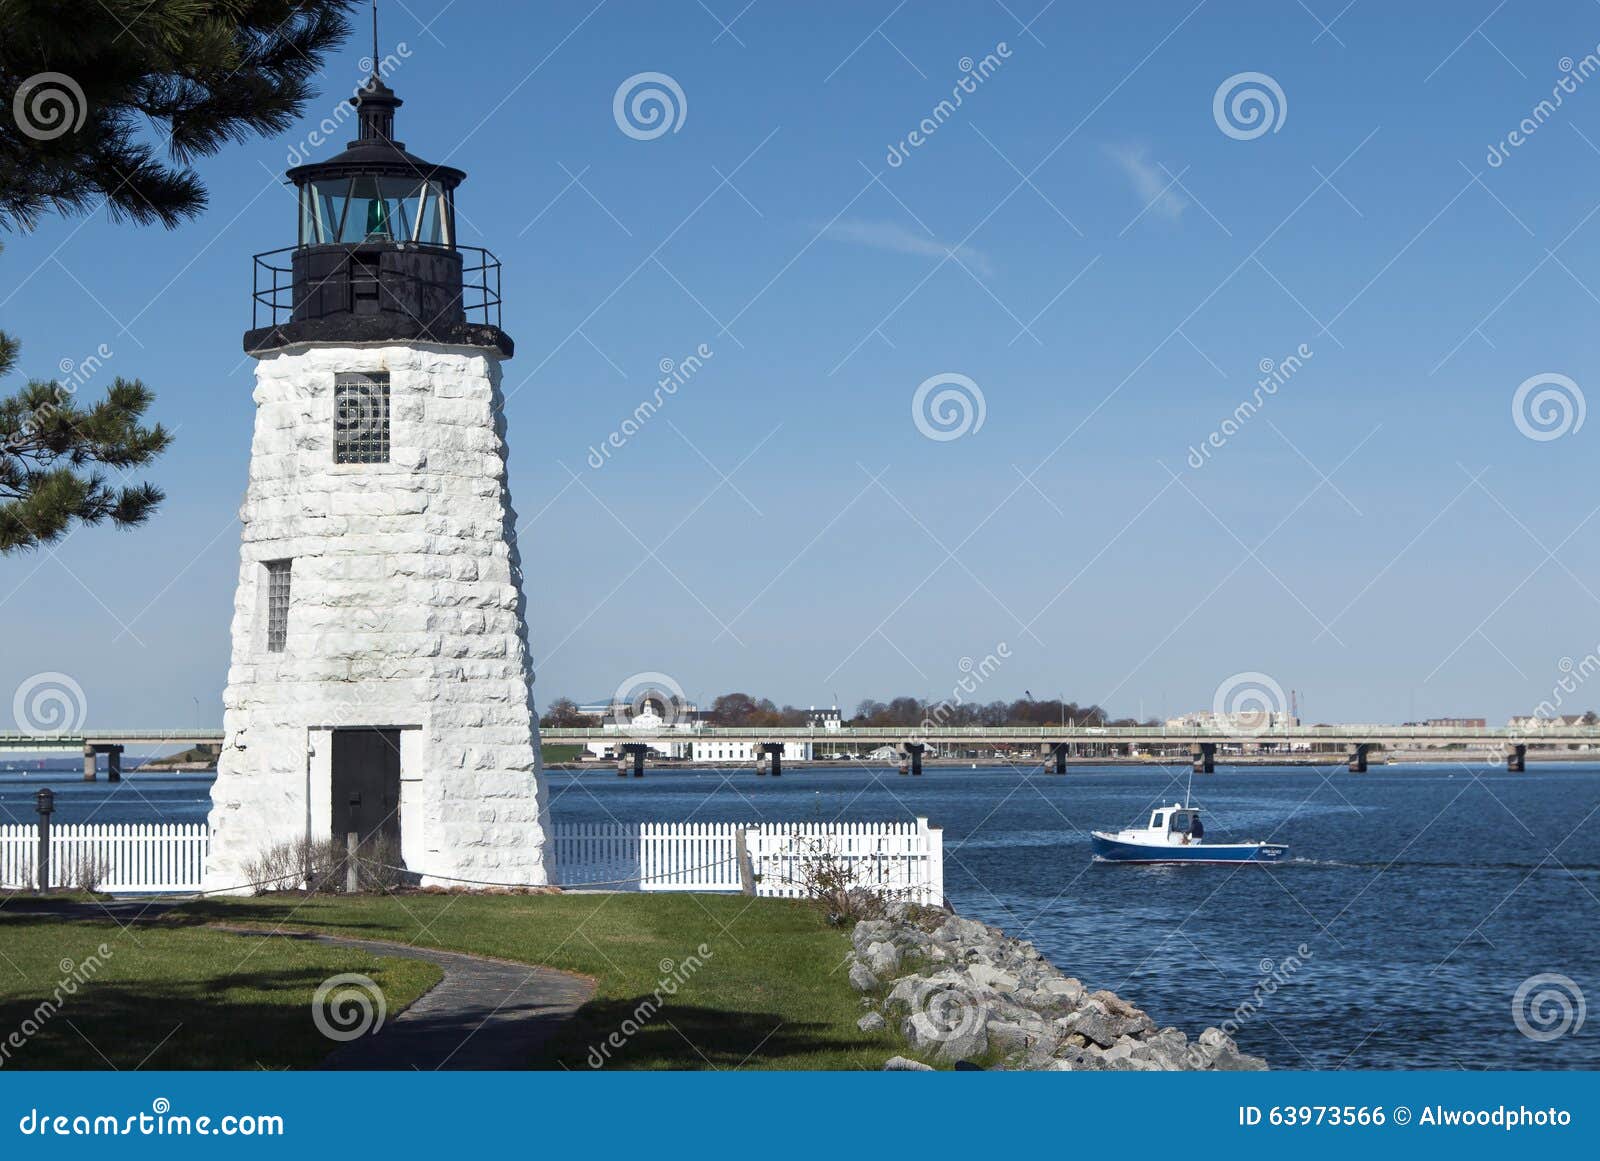 Lobster boat passes by Newport Harbor Lighthouse in Rhode Island.